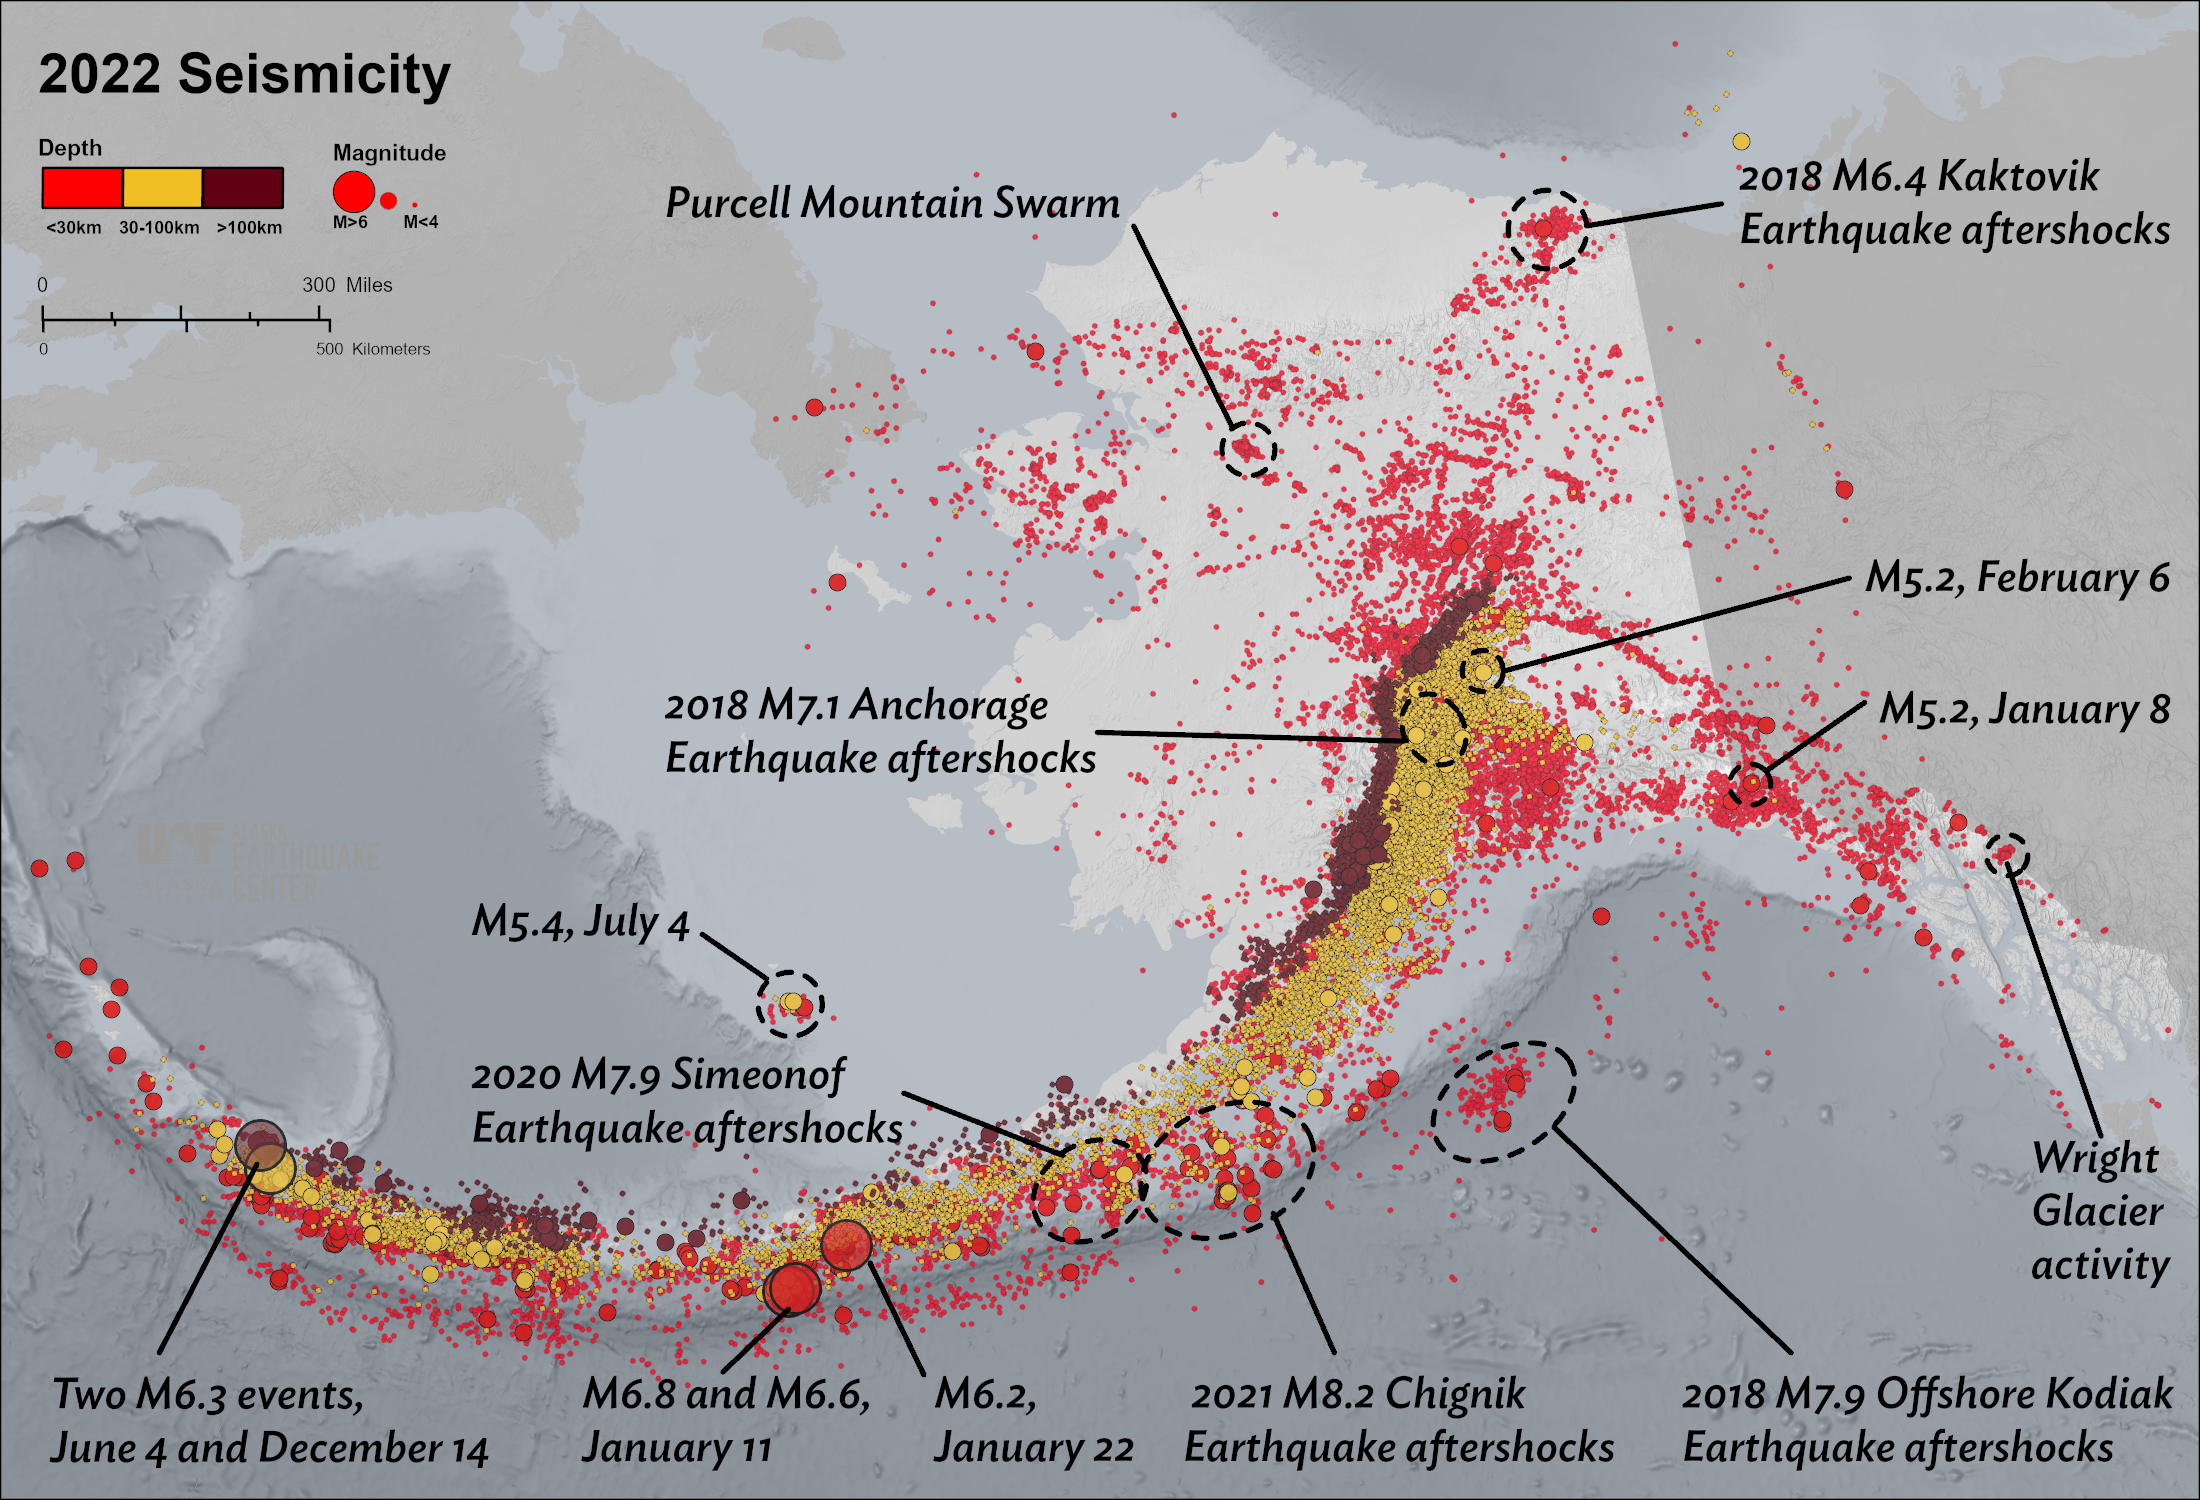 Map of Alaska showing earthquake magnitude and depth, including the largest magnitude events from 2022, Purcell Mountains Swarm in the western Interior, Wright Glacier in Southeast, and clusters of ongoing aftershock sequences. 